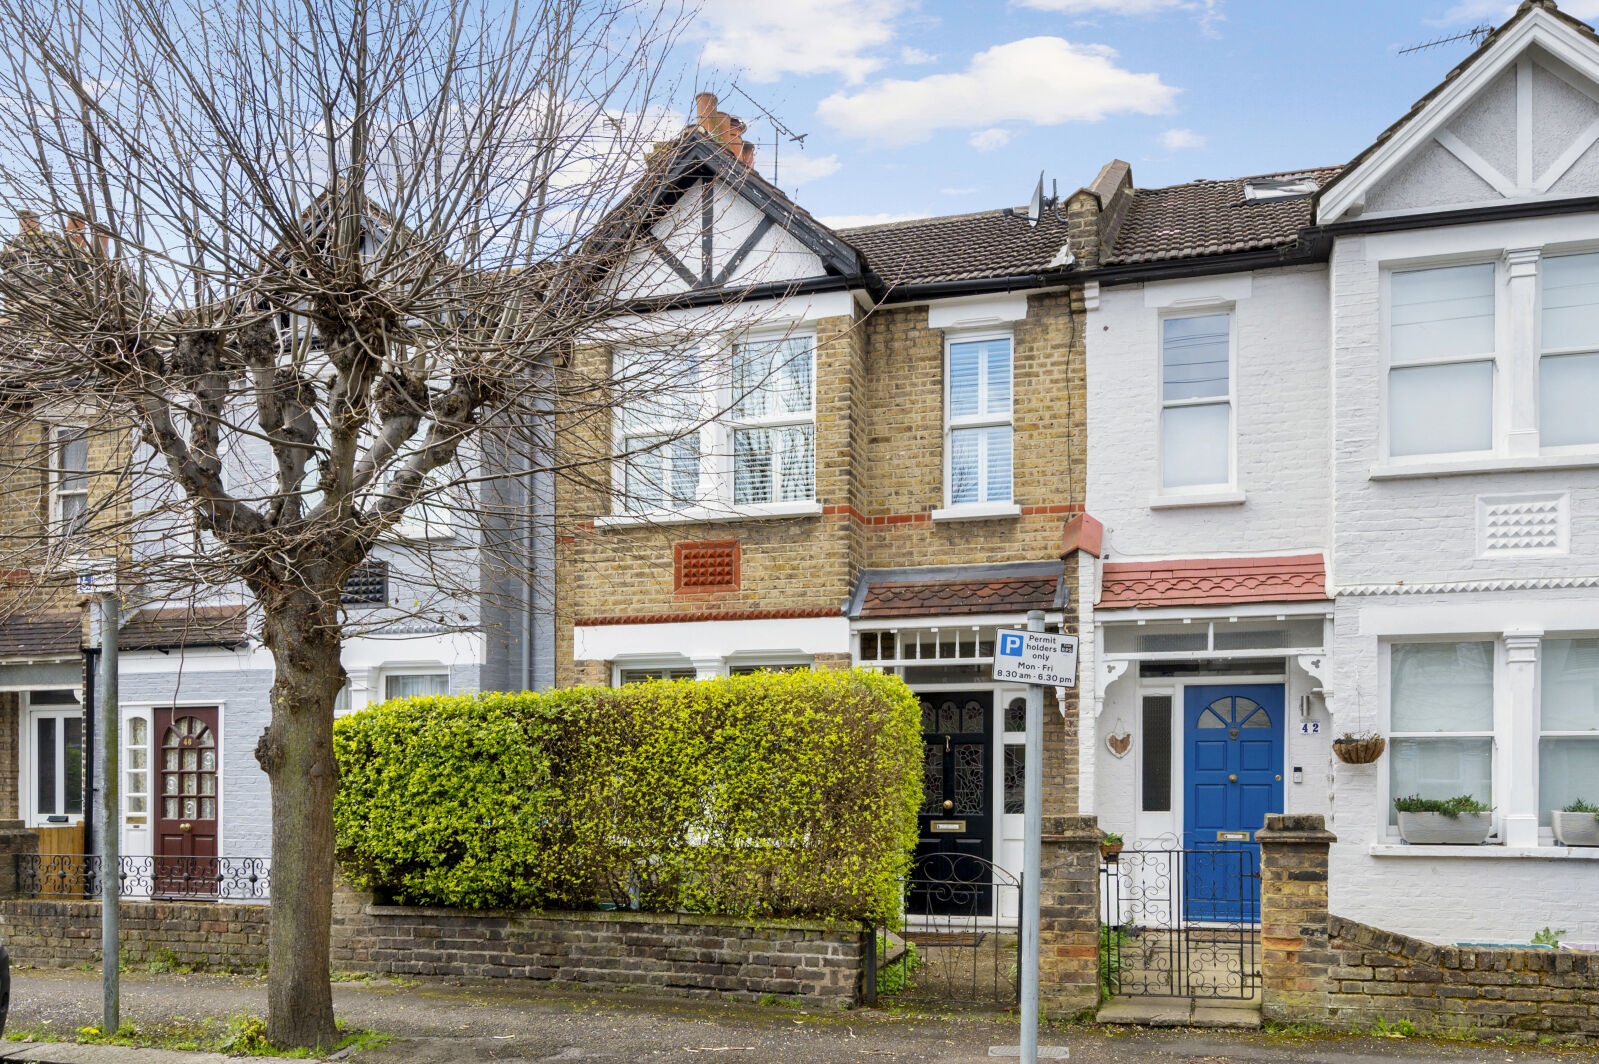 2 bedroom mid terraced house for sale Aston Road, Raynes Park, SW20, main image